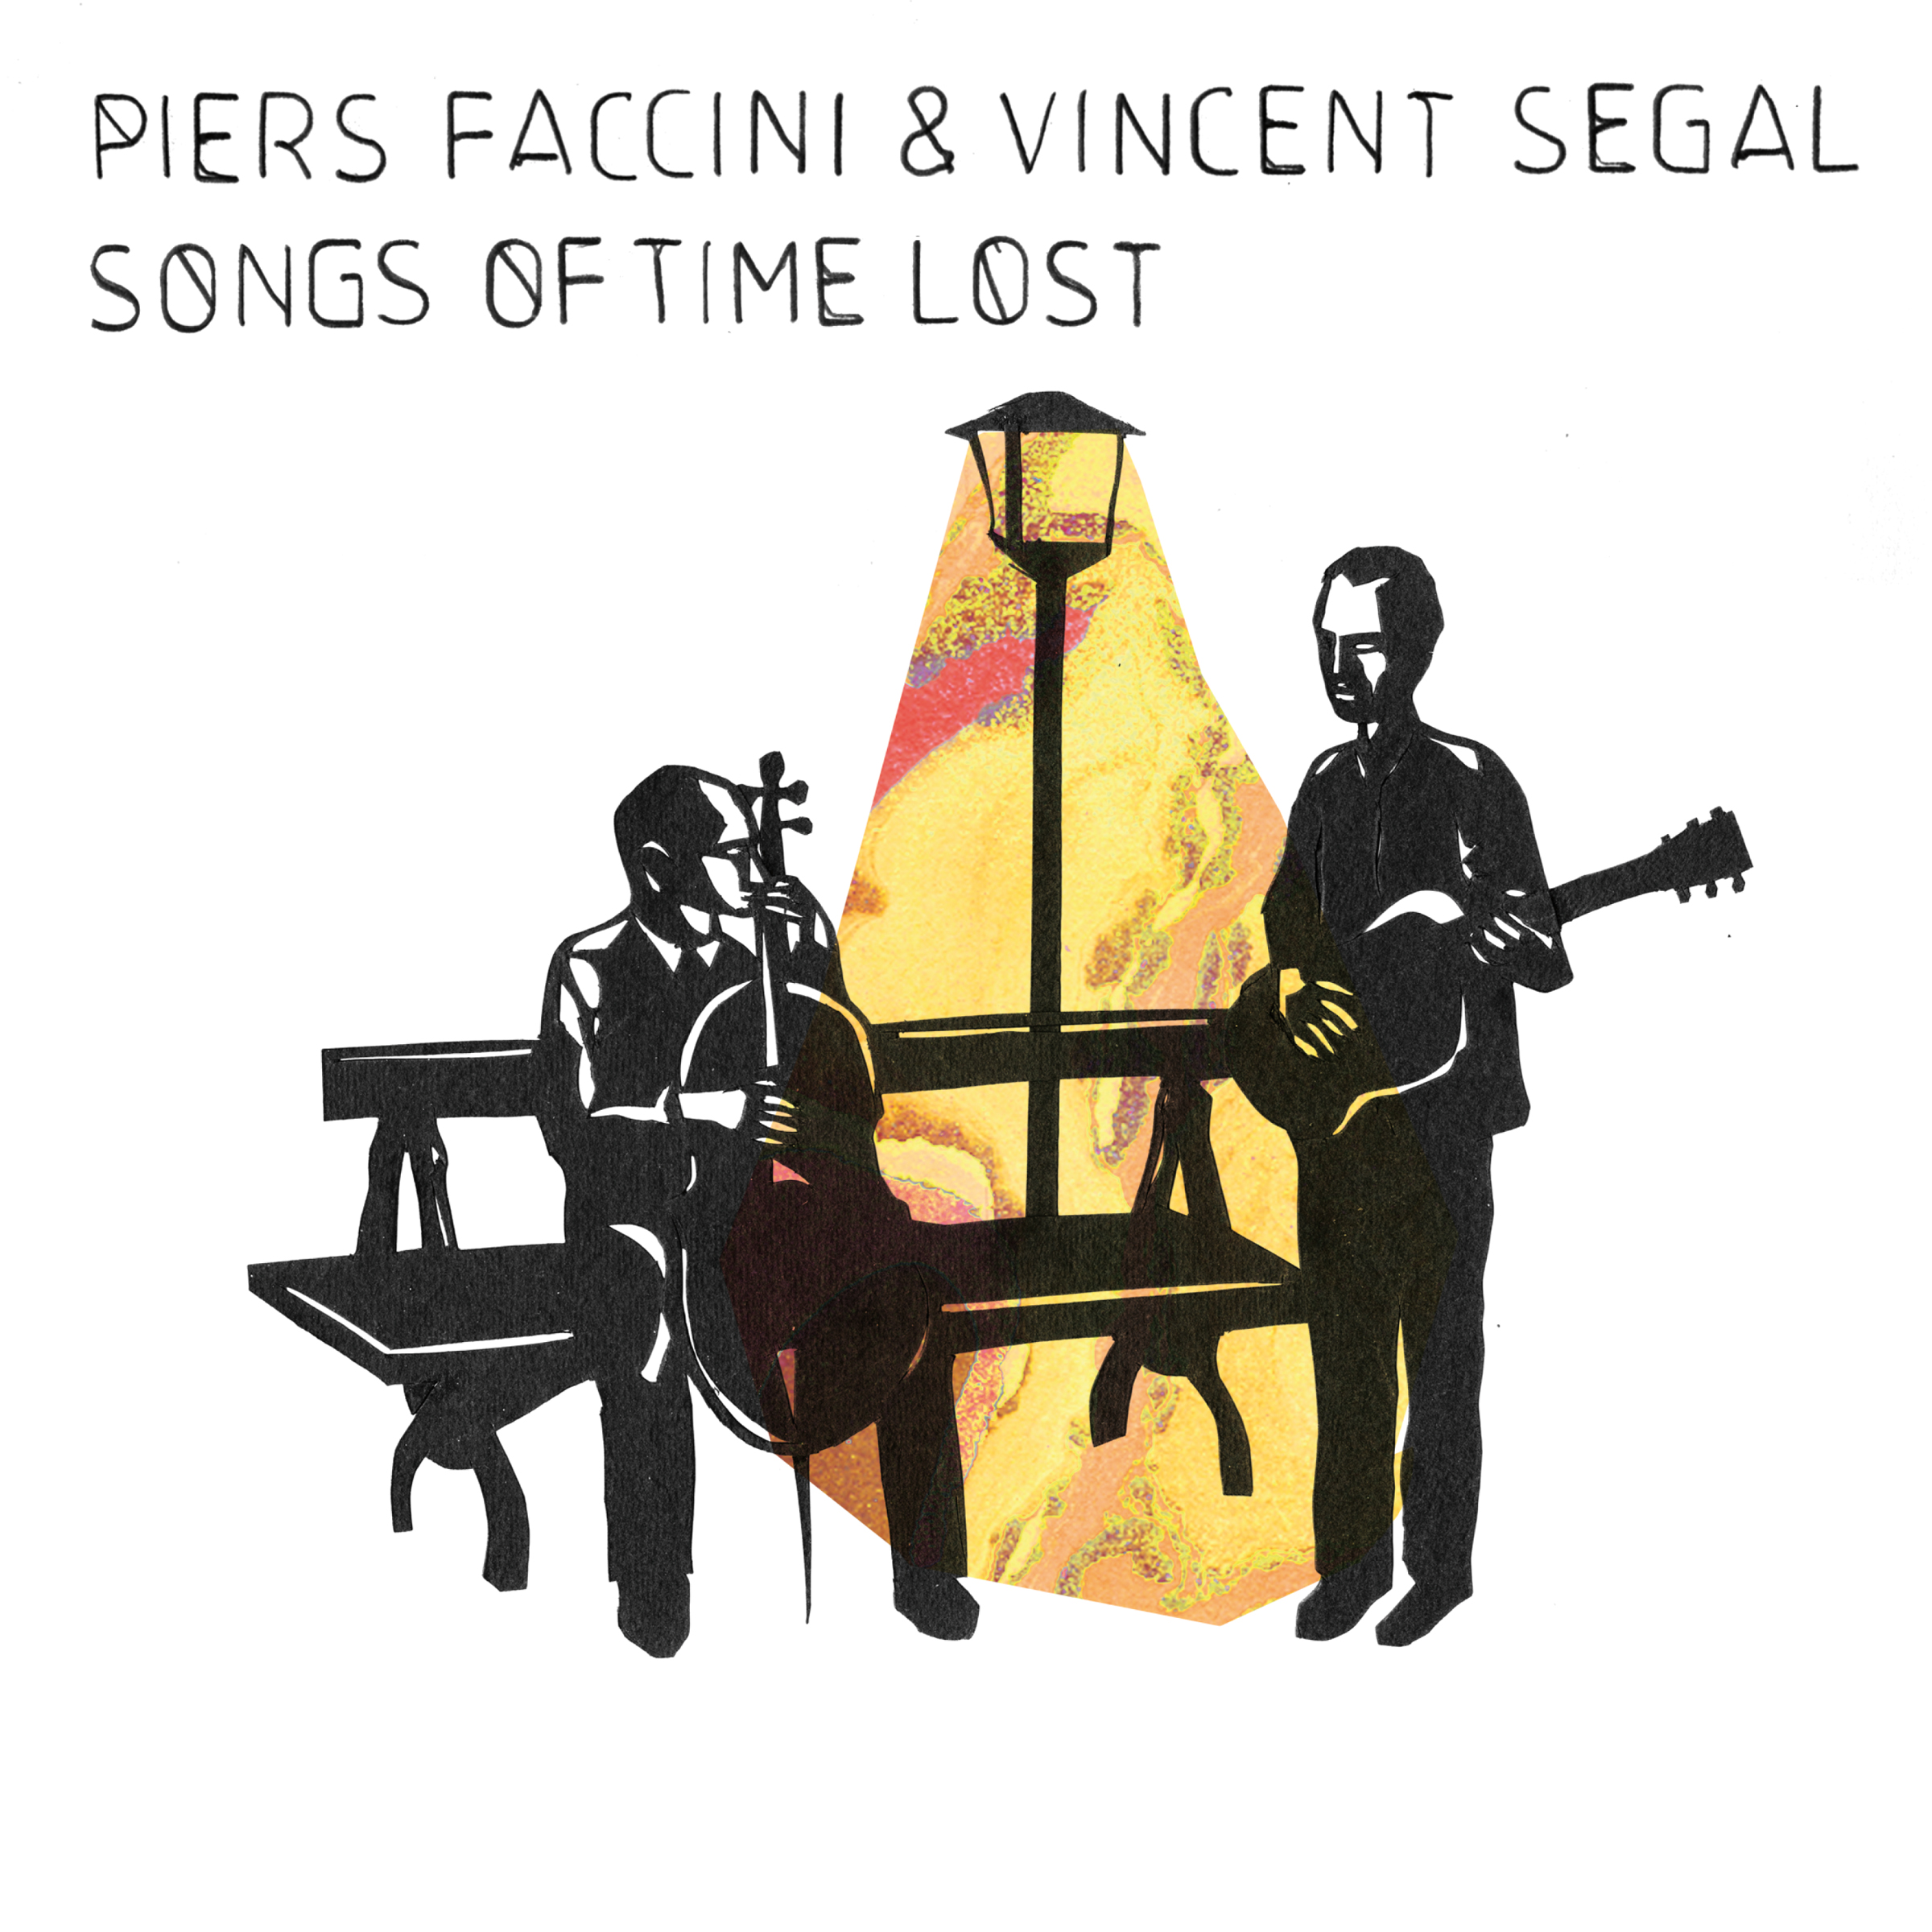 Piers Faccini & Vincent Segal – Songs Of Time Lost